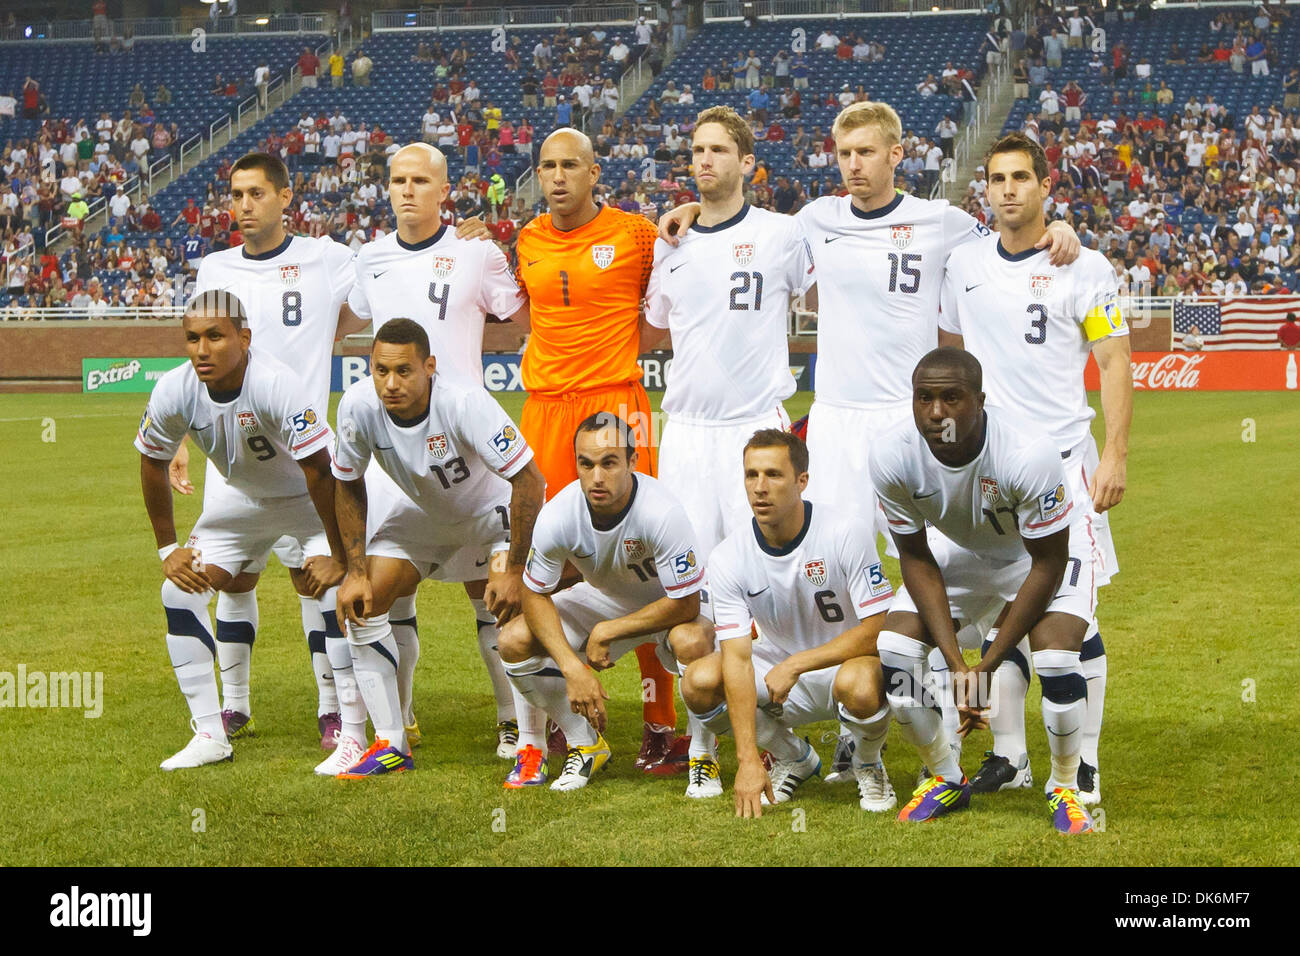 June 7, 2011 - Detroit, Michigan, U.S - The starting players for the United States pose for team photographs prior to the start of the match.  The United States defeated Canada 2-0 in the second match of the Group C-play opening round doubleheader of the 2011 CONCACAF Gold Cup soccer tournament played at Ford Field in Detroit, Michigan. (Credit Image: © Scott Grau/Southcreek Global Stock Photo